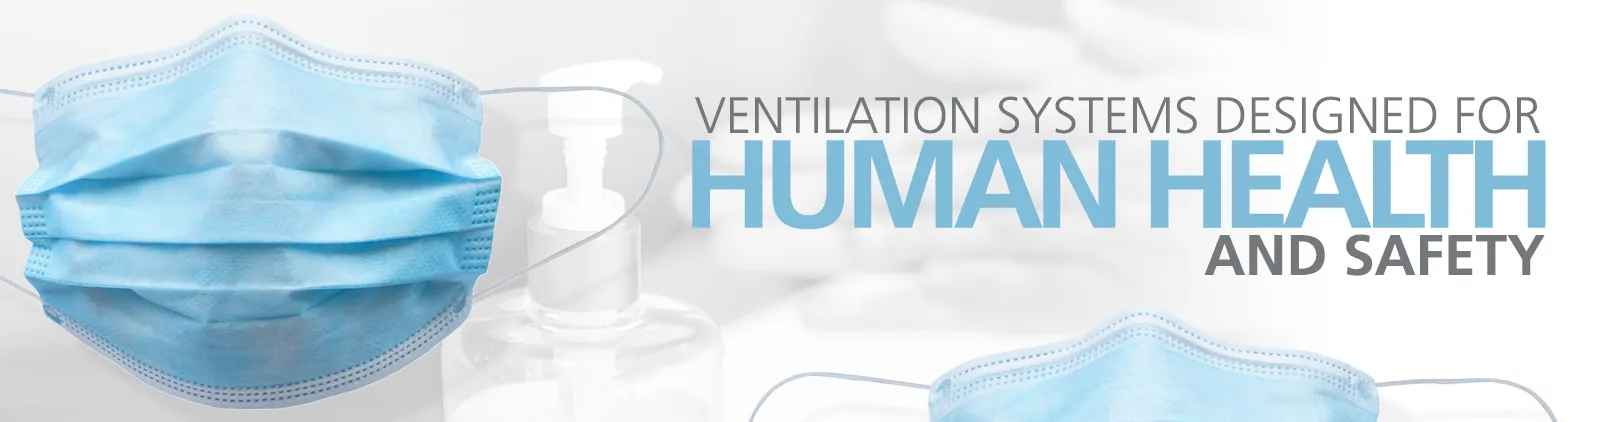 Ventilation Systems Designed for Human Health and Safety